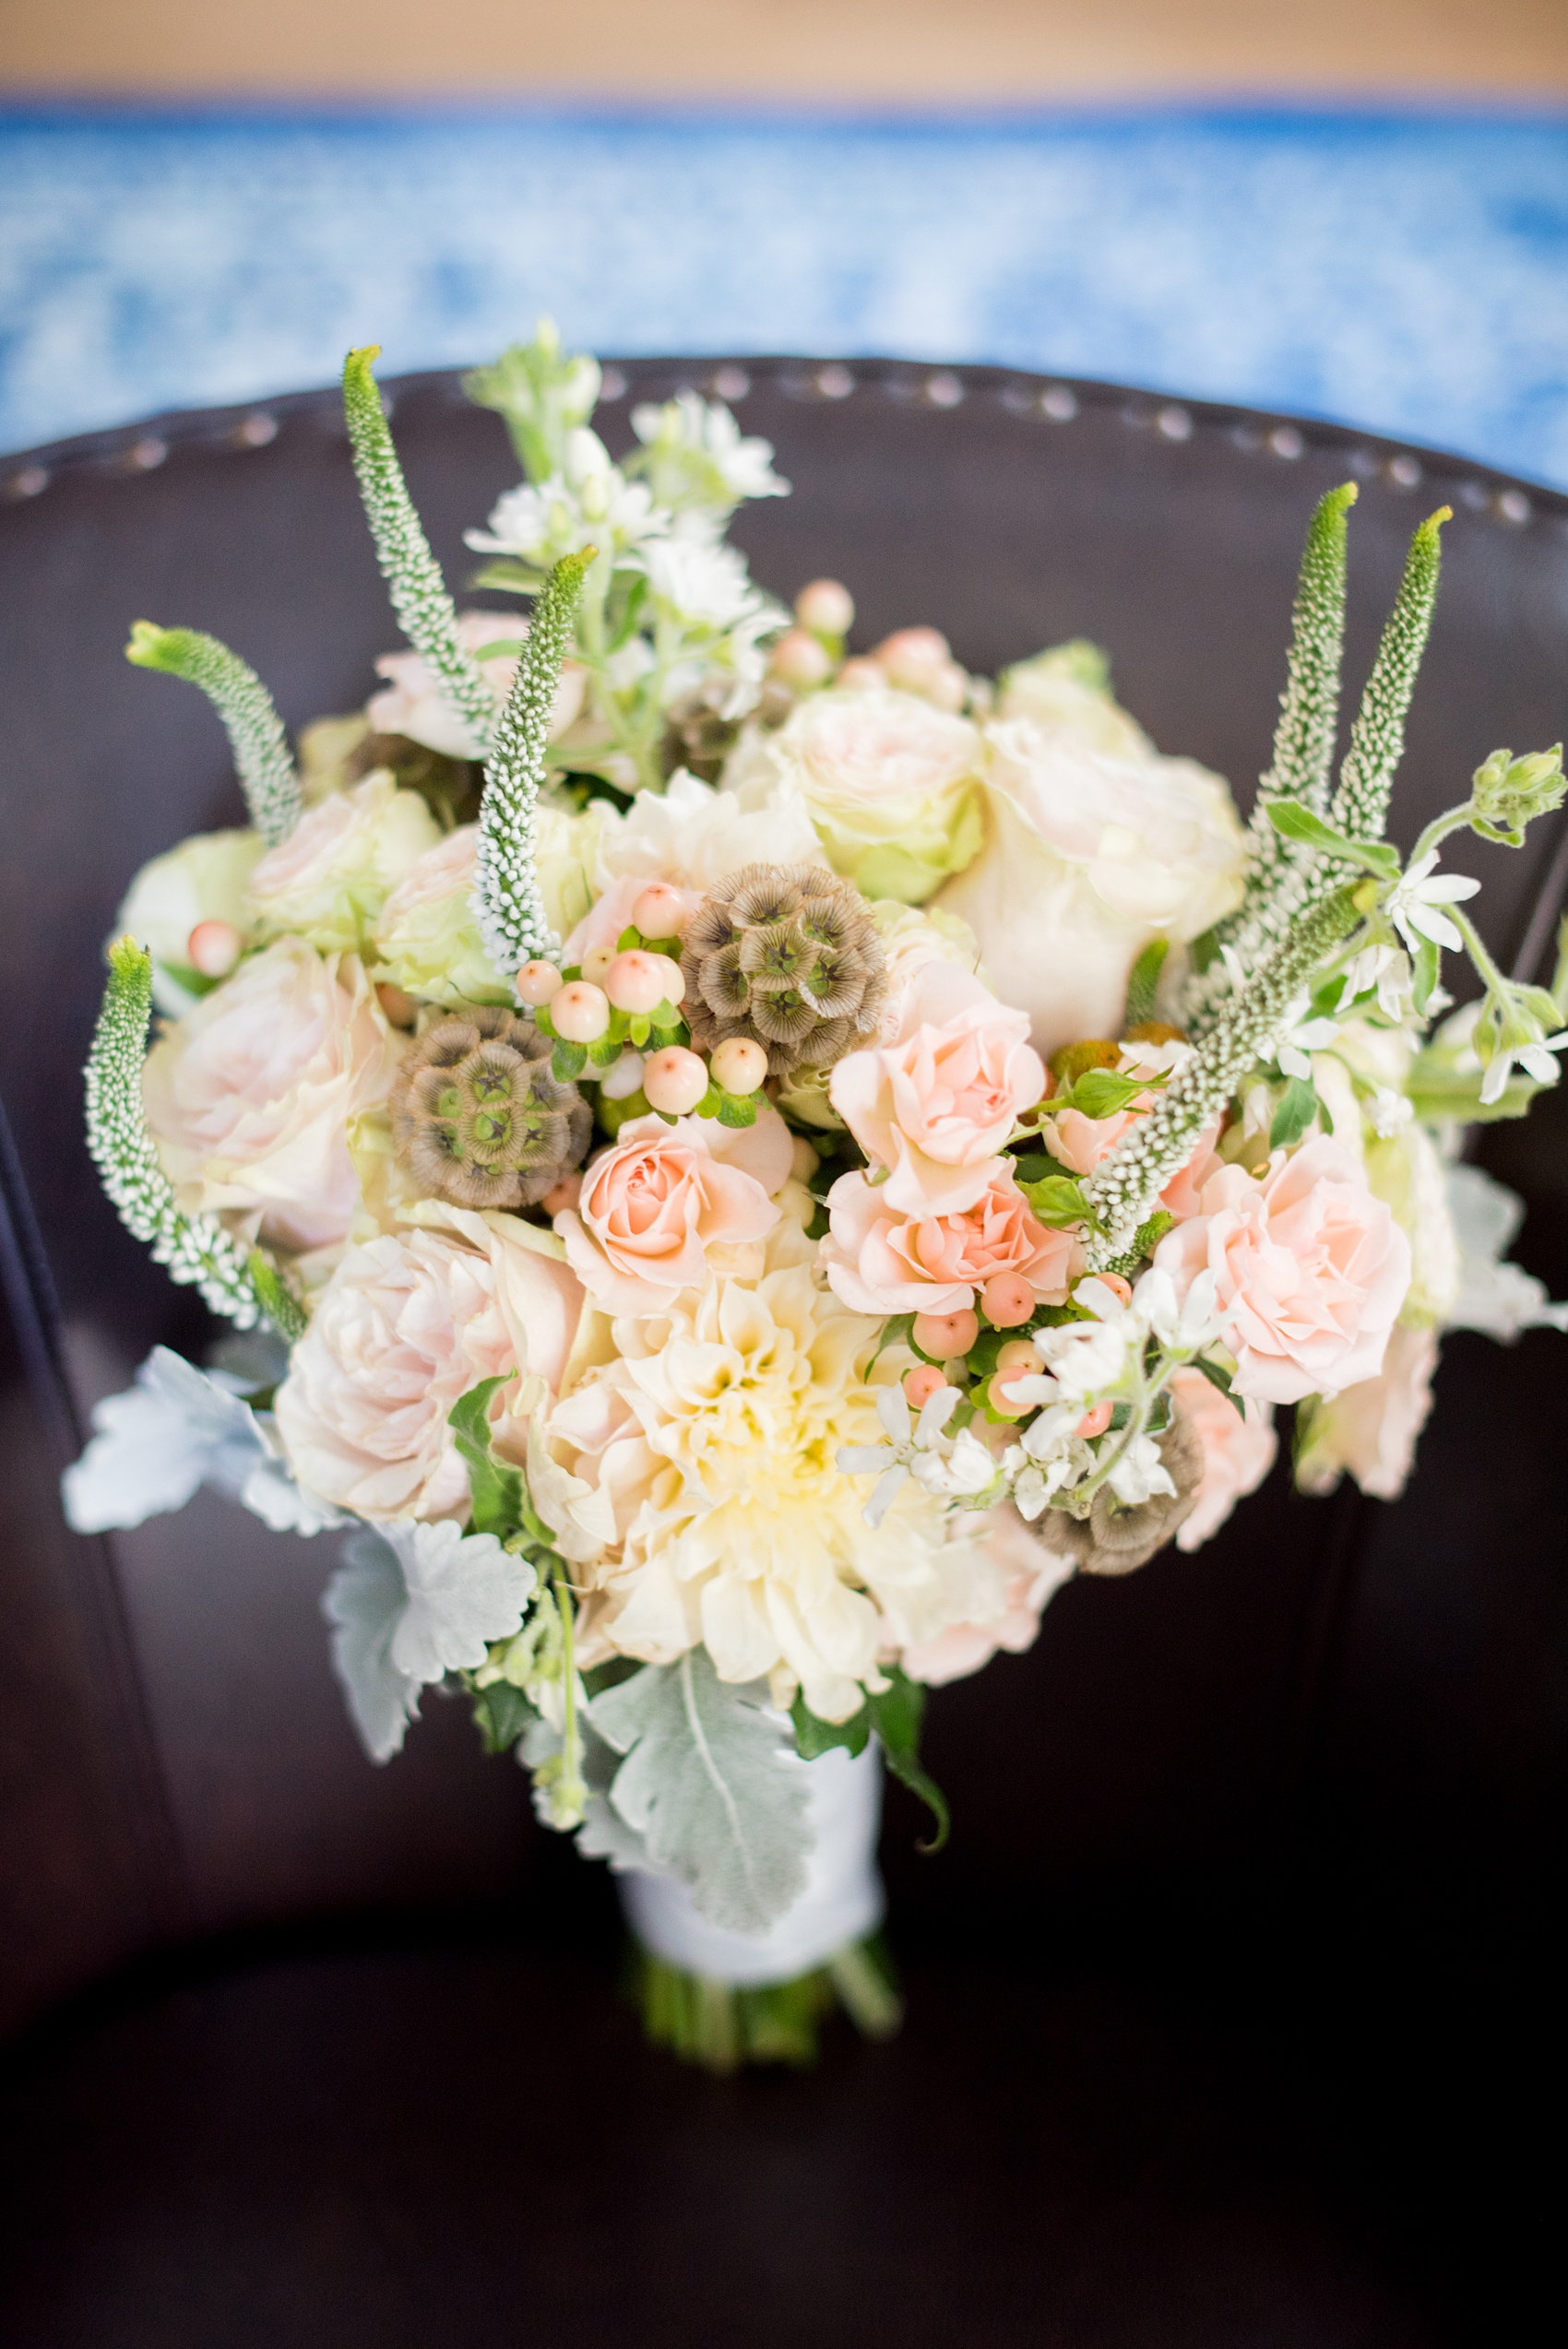 Mikkel Paige Photography photos of a wedding at Crabtree Kittle's House. Picture of the bride's bouquet. Includes scabiosa, spray roses, dusty miller and garden roses.